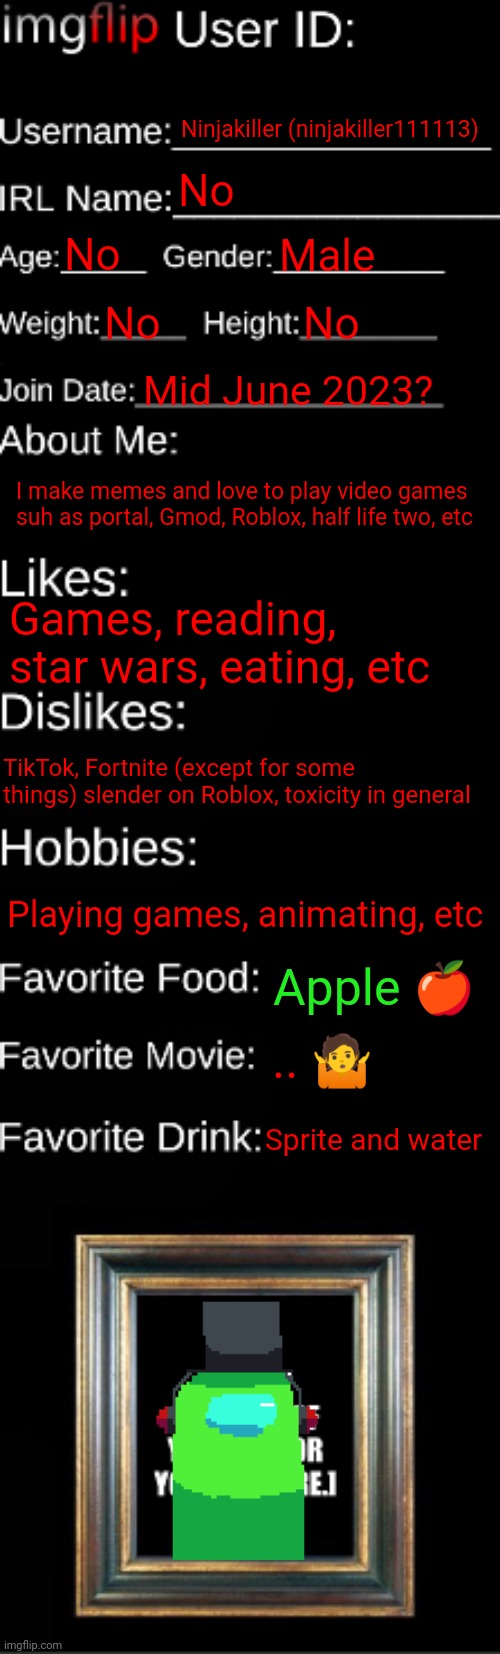 My id card | Ninjakiller (ninjakiller111113); No; No; Male; No; No; Mid June 2023? I make memes and love to play video games suh as portal, Gmod, Roblox, half life two, etc; Games, reading, star wars, eating, etc; TikTok, Fortnite (except for some things) slender on Roblox, toxicity in general; Playing games, animating, etc; Apple 🍎; .. 🤷; Sprite and water | image tagged in imgflip id card,ninjakiller,id | made w/ Imgflip meme maker